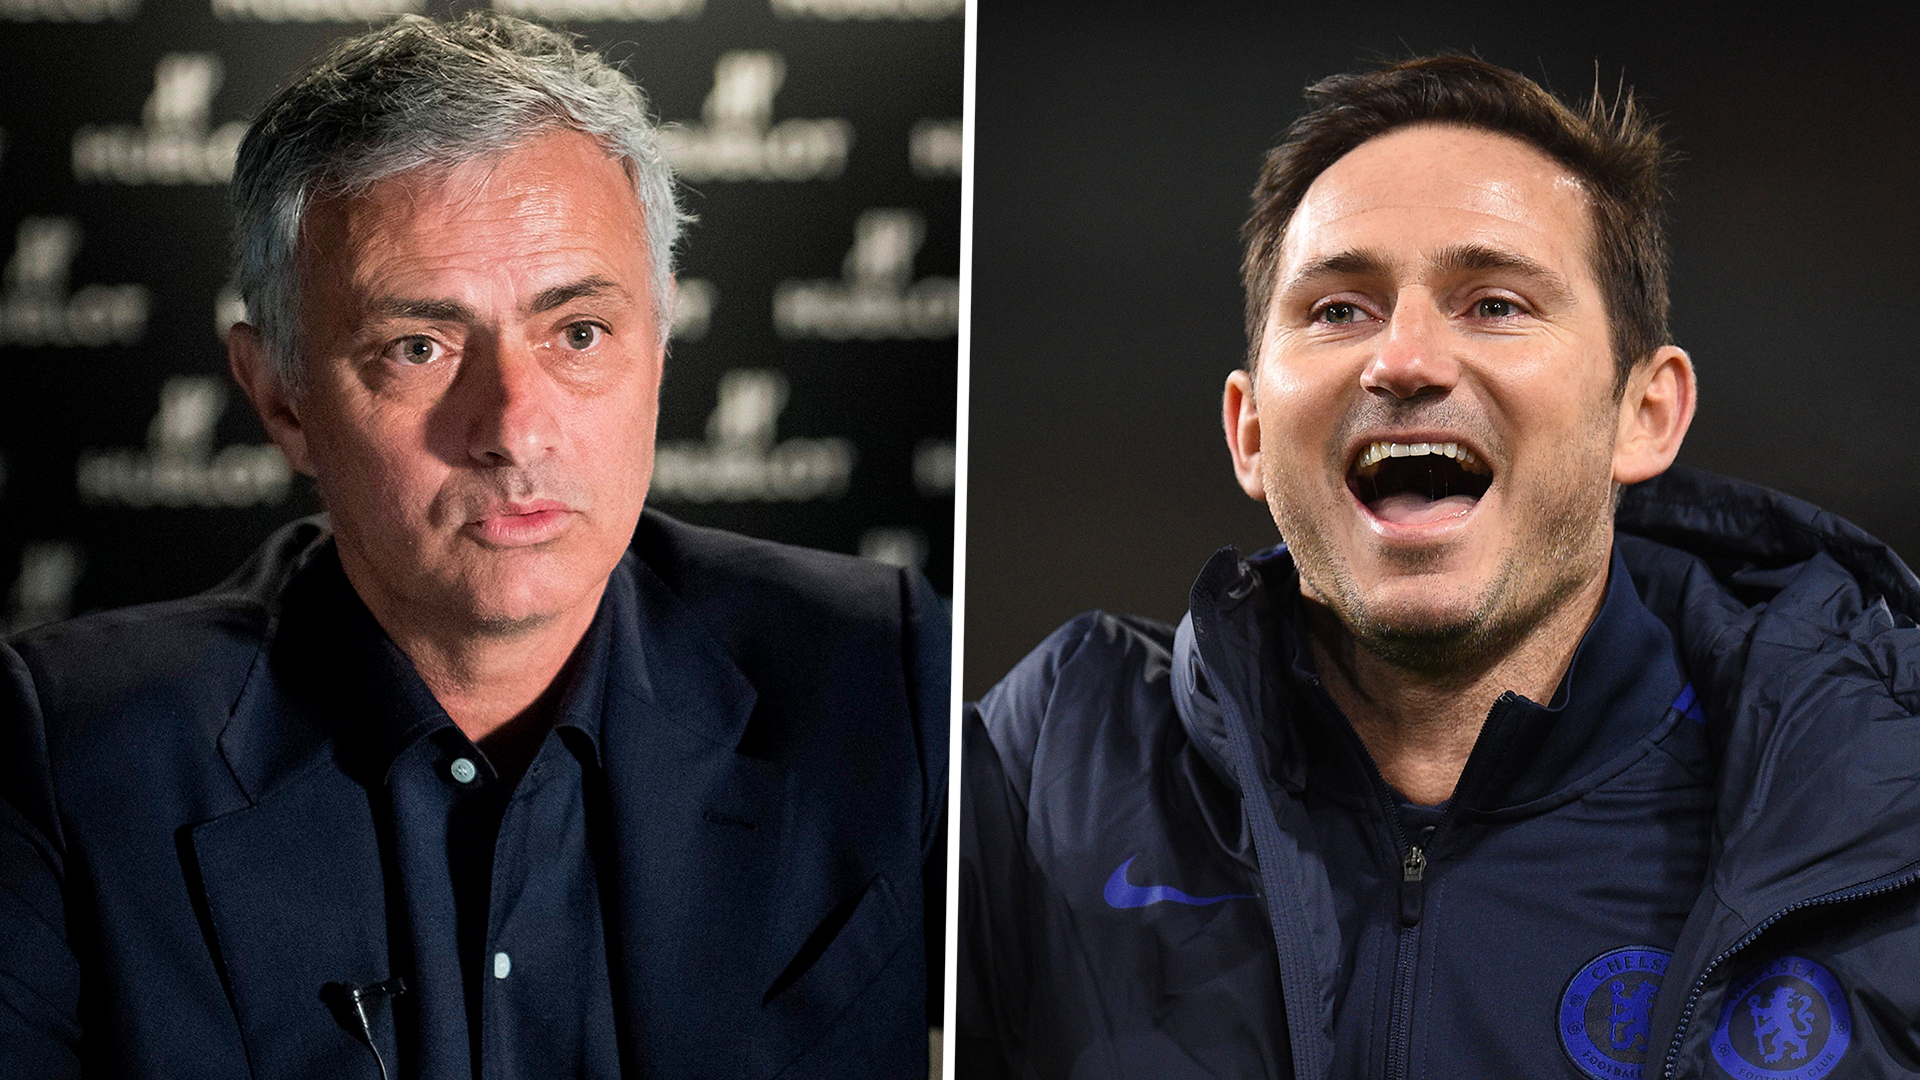 Chelsea boss Lampard: Mourinho taught me how to bond with young players